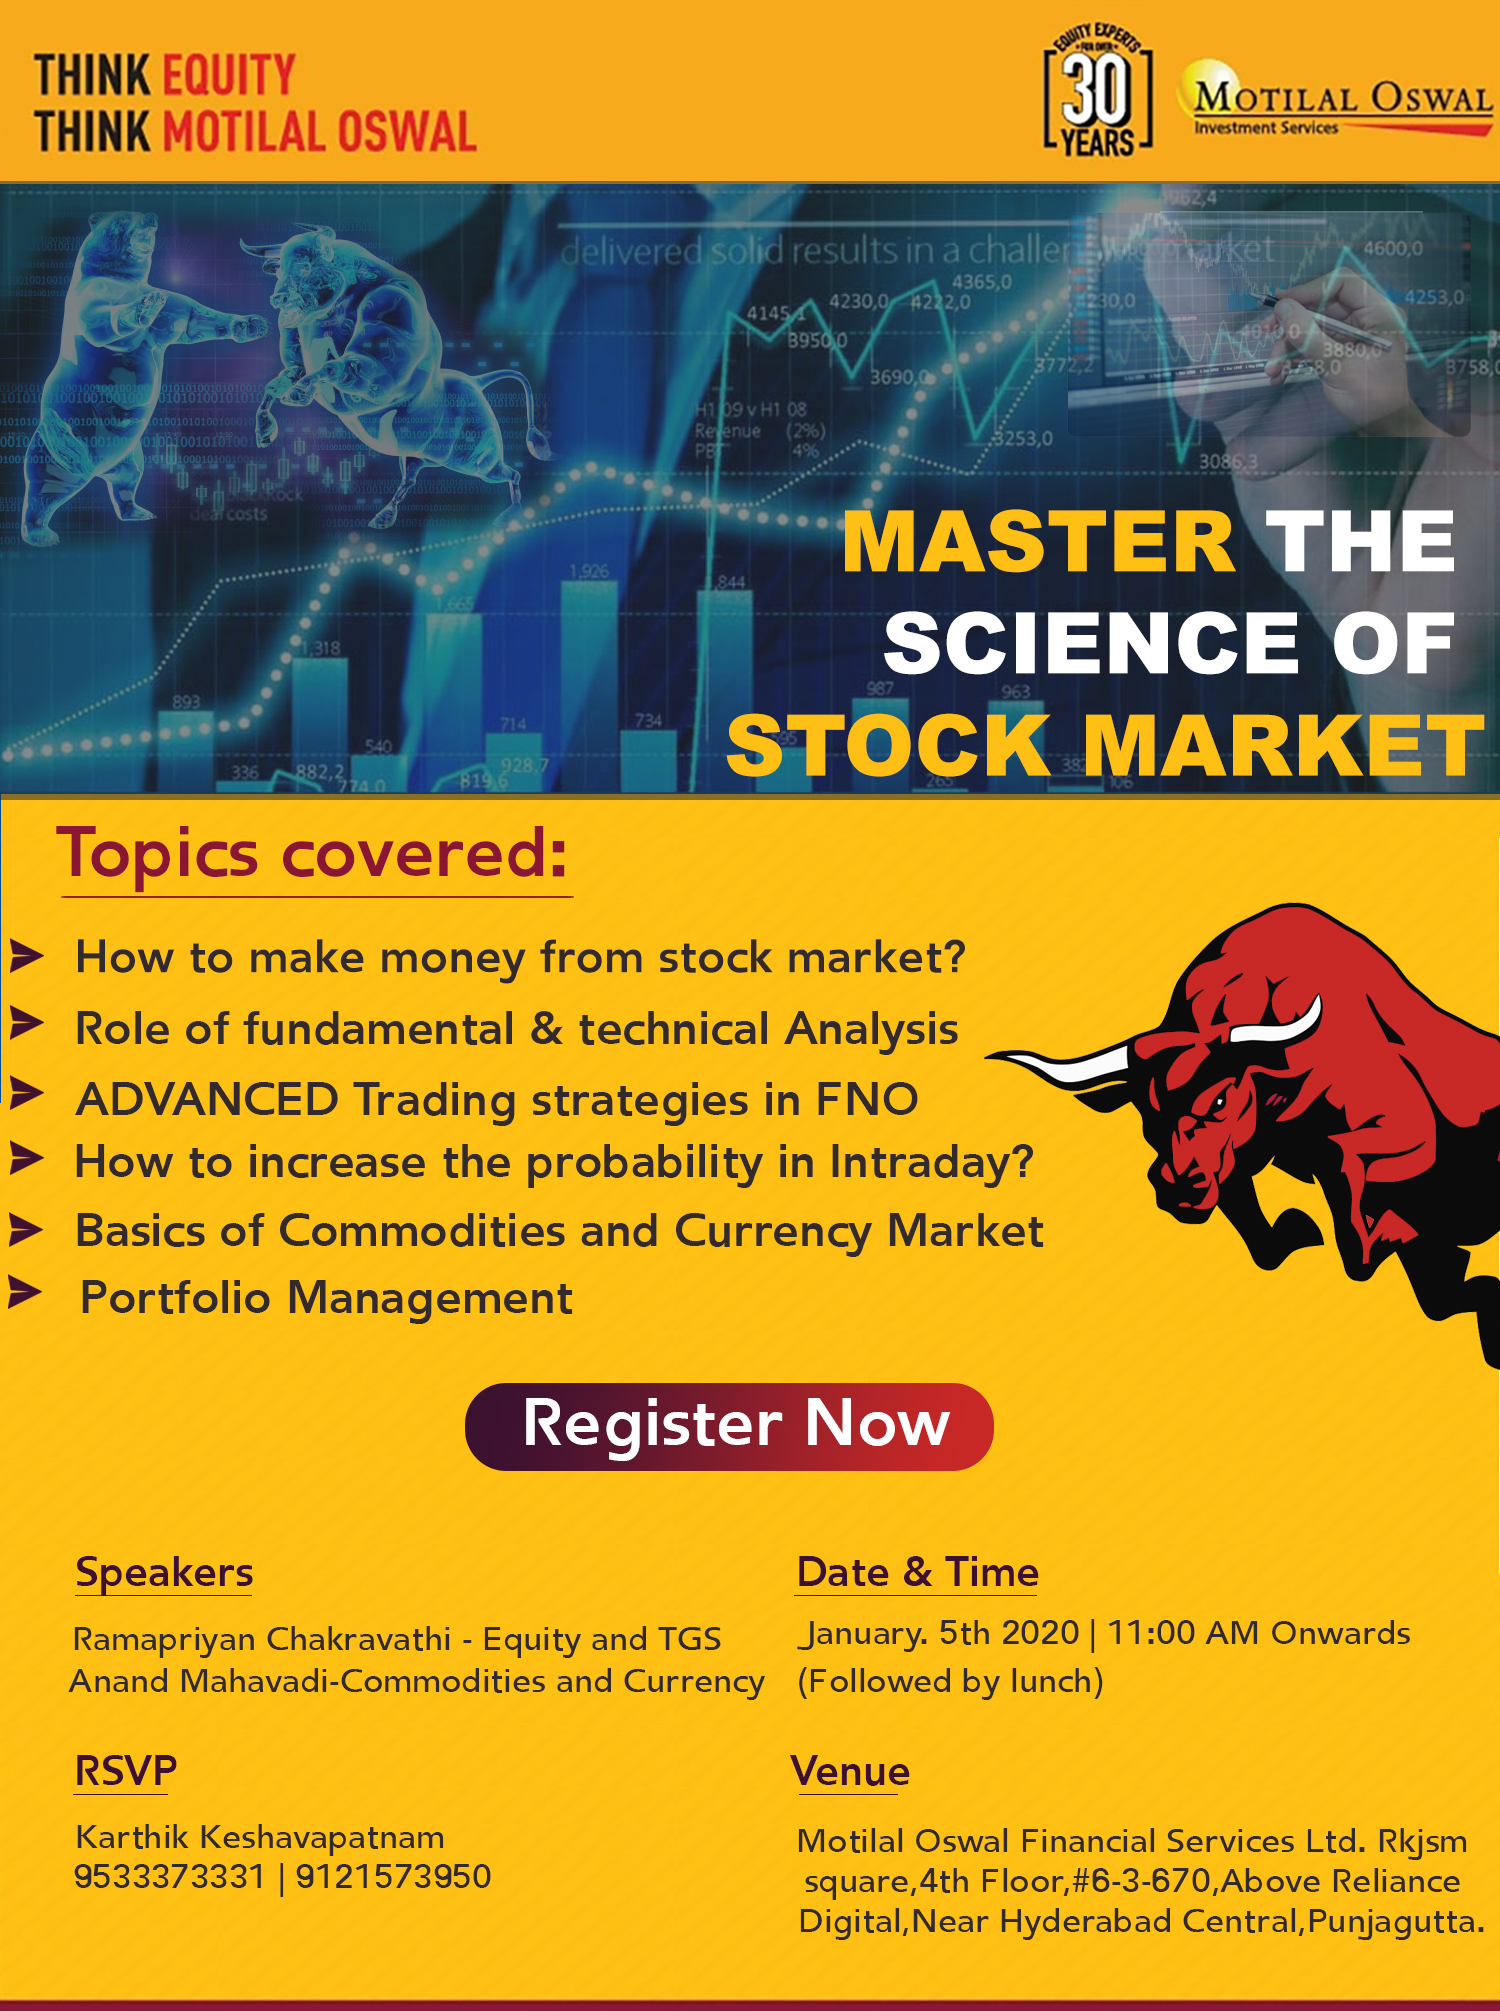 MASTER THE SCIENCE OF STOCK MARKET" an exclusive workshop on trading in Hyderabad, Hyderabad, Telangana, India